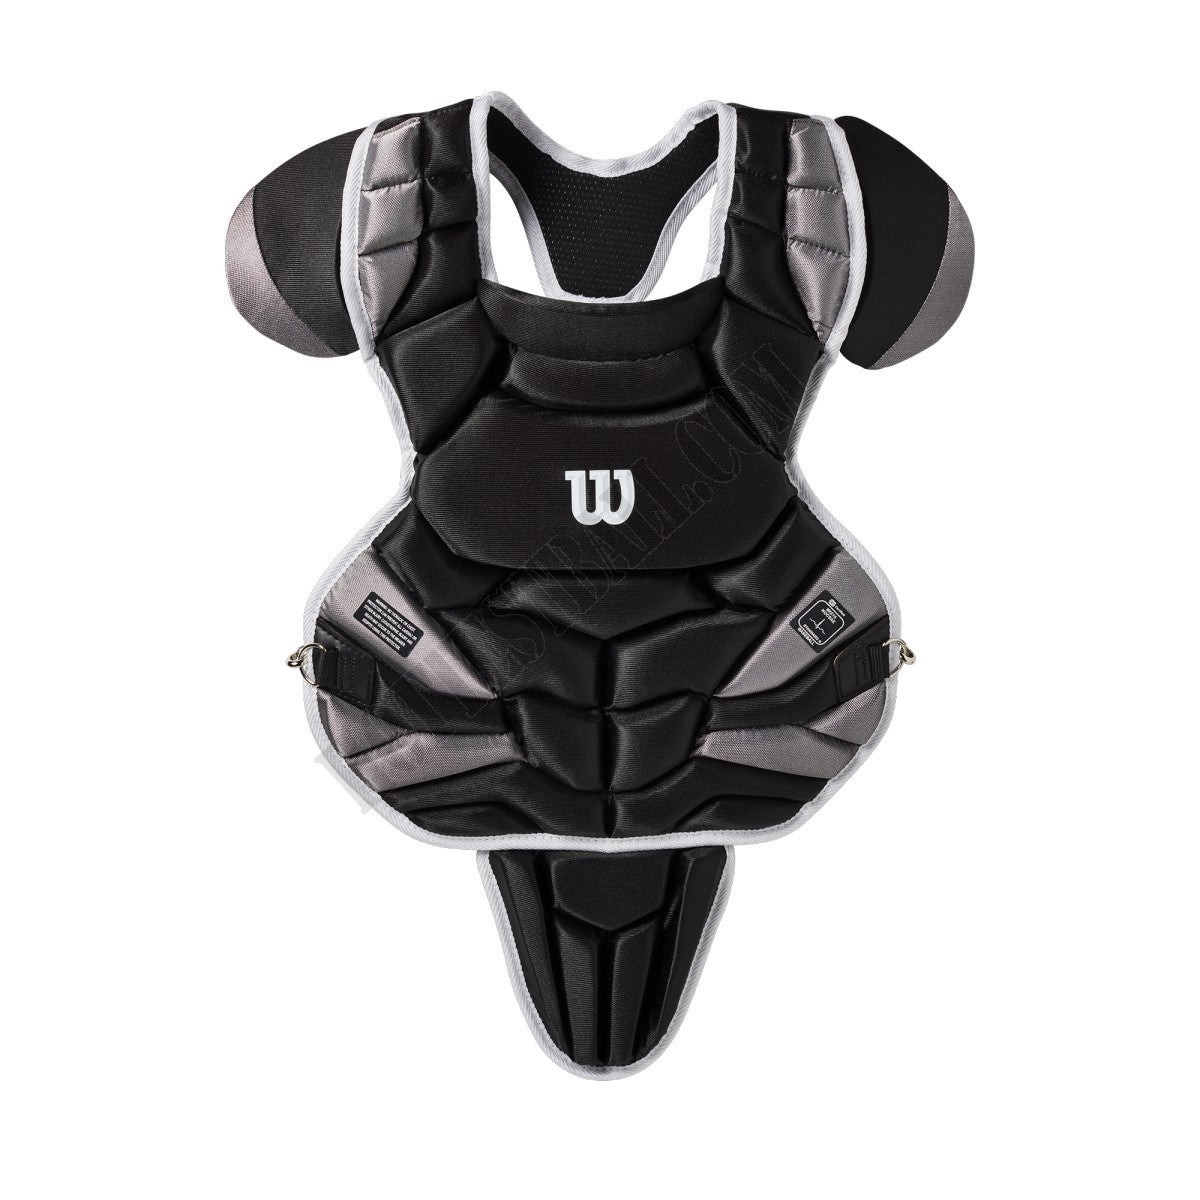 Wilson C1K NOCSAE Approved Chest Protector - Intermediate - Wilson Discount Store - Wilson C1K NOCSAE Approved Chest Protector - Intermediate - Wilson Discount Store